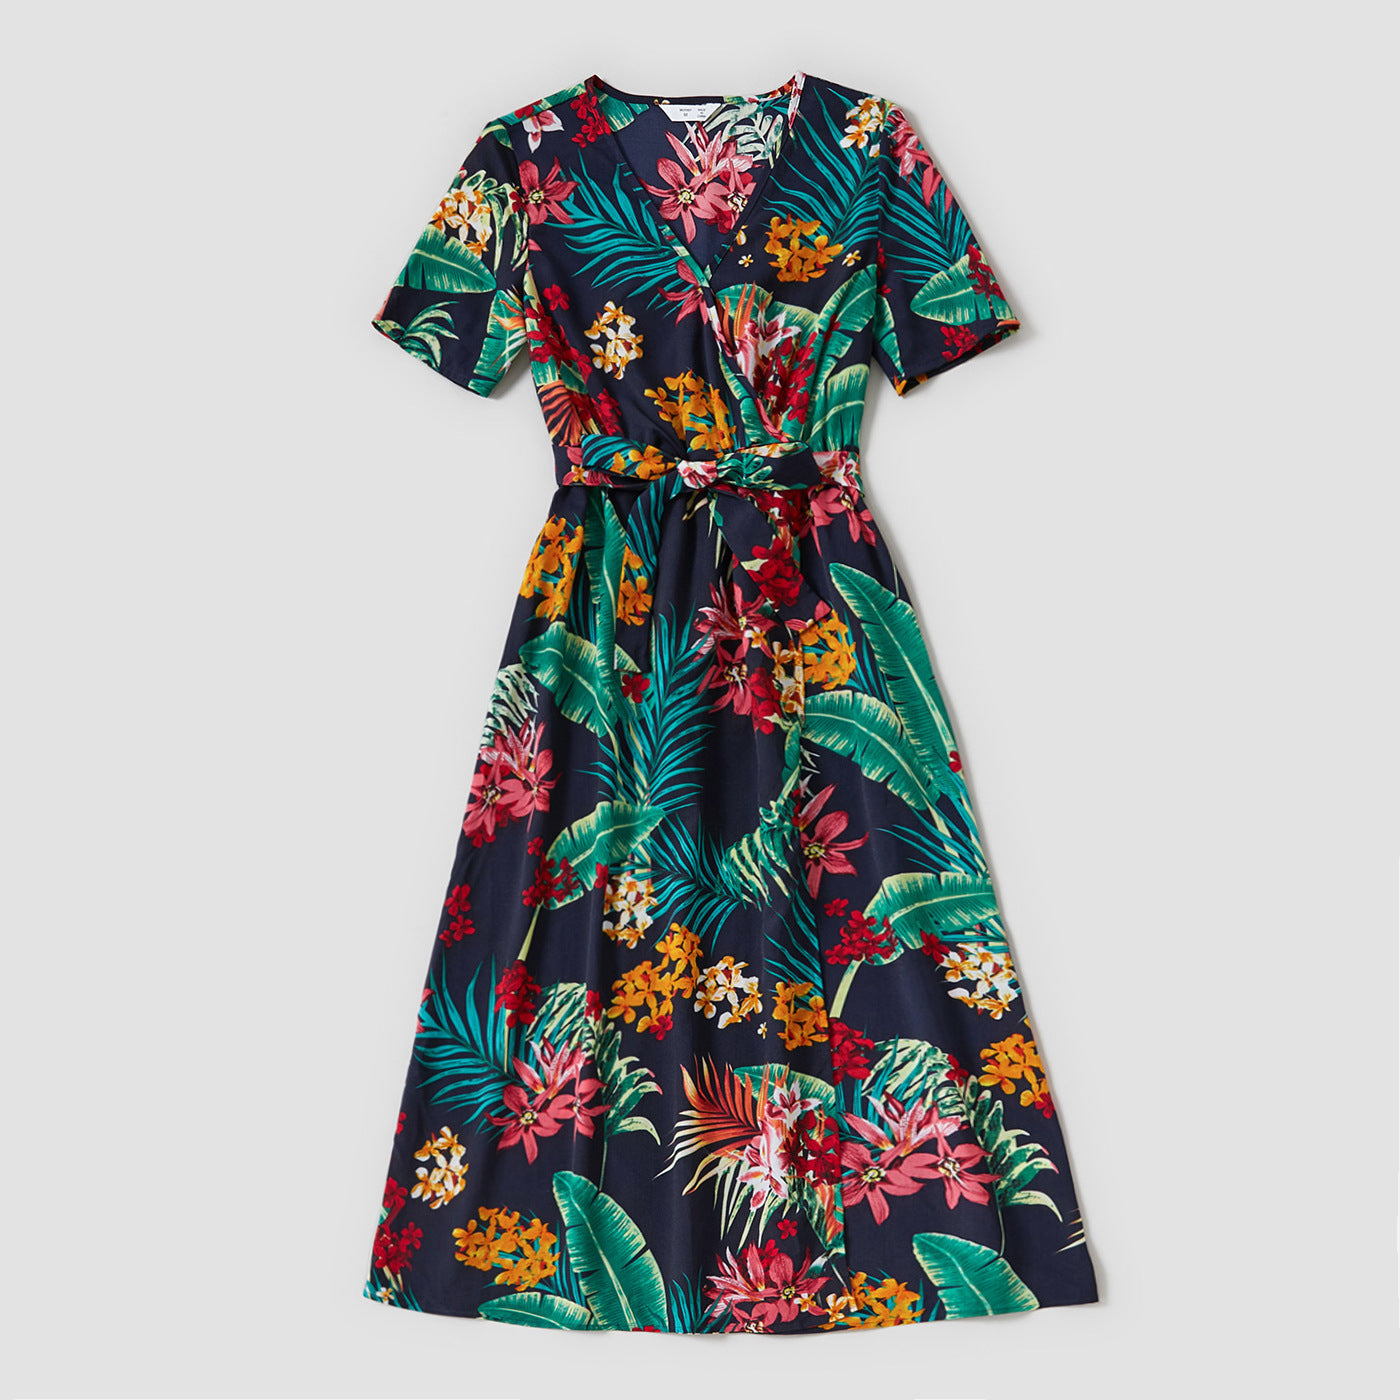 Family Matching All Over Floral Print Short-sleeve Belted Dresses and Colorblock T-shirts Sets